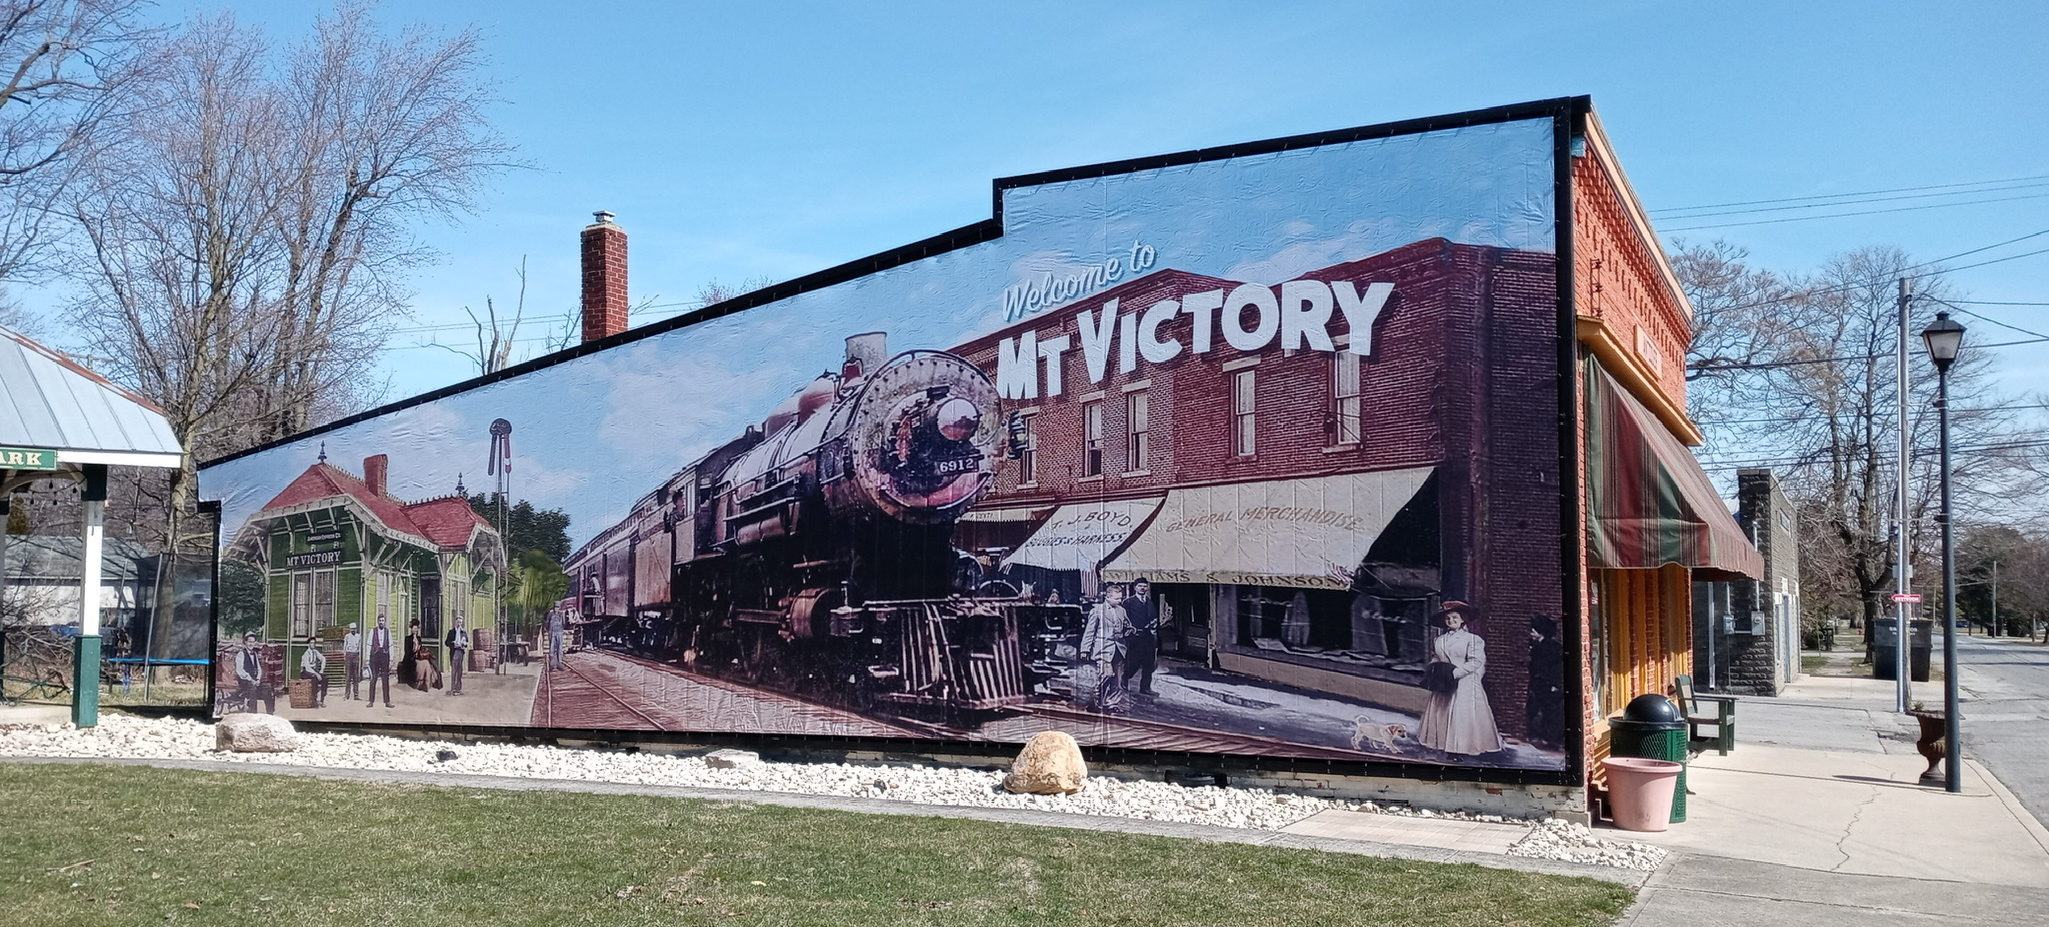 welcome-to-mt-victory-wallscape-mural-signspring-bannerframe-classic-lind-e1680129890255 SignSpring Gets Civic